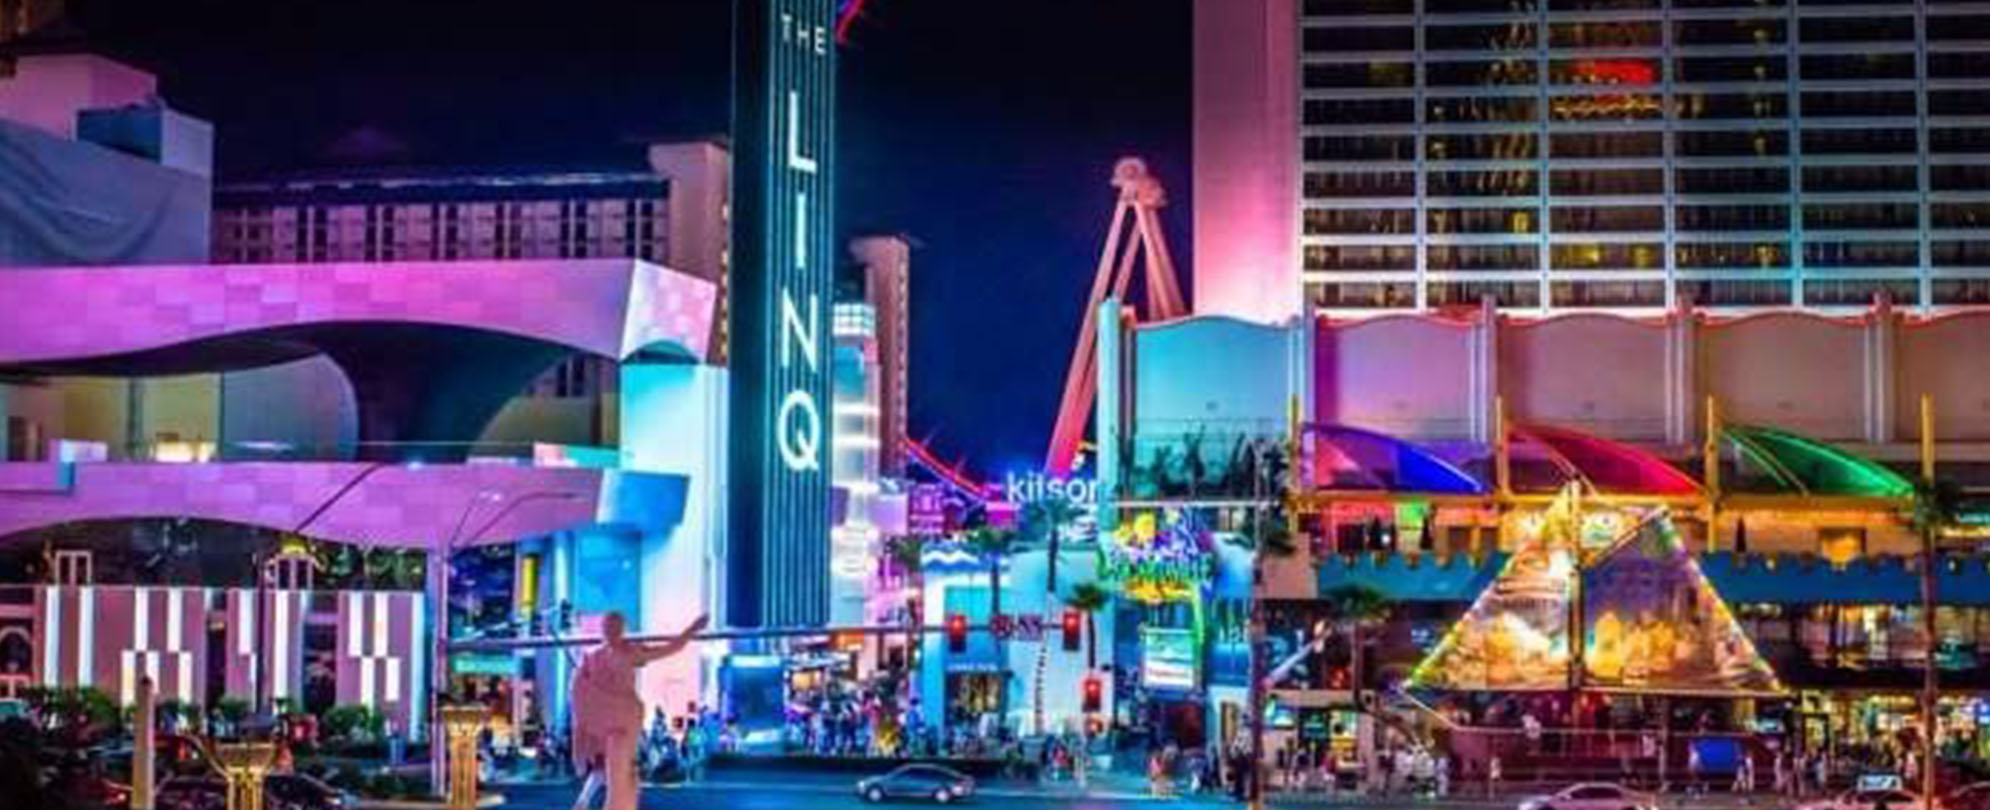 The LINQ Hotel and tourist attractions lit up at night on the Las Vegas Strip.